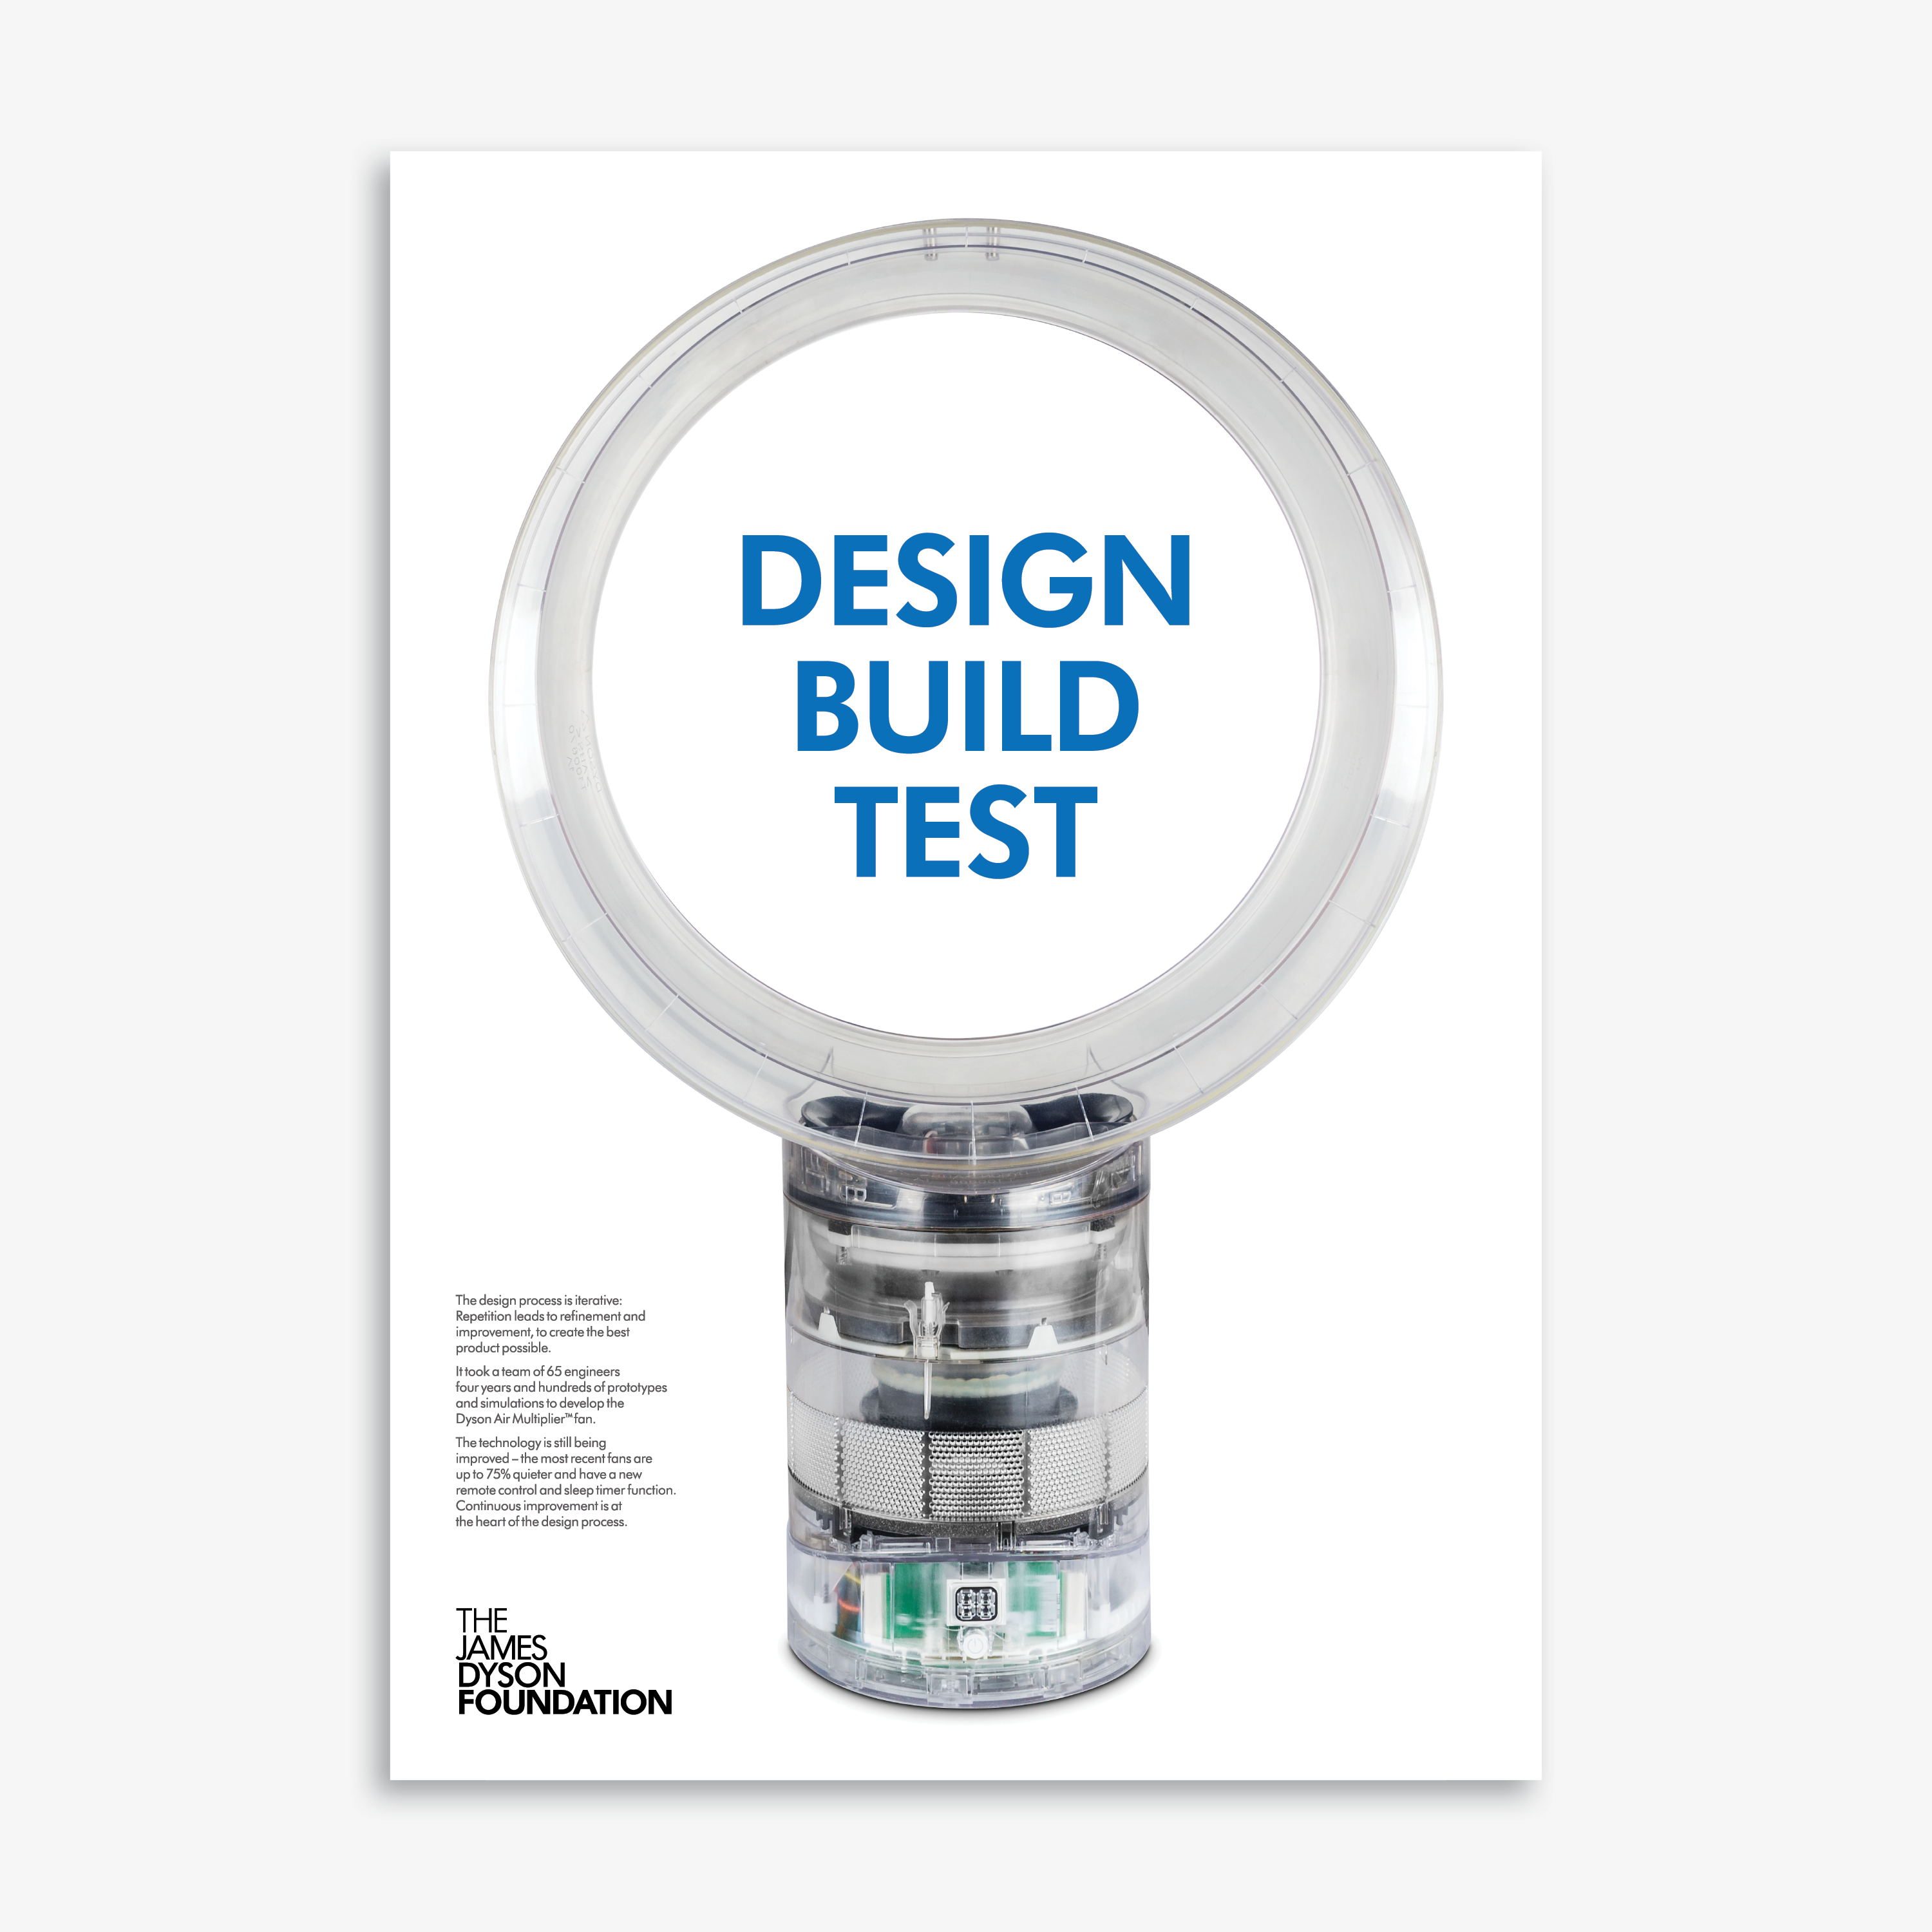 A poster from the Design Process Box featuring a Dyson Air Multiplier fan and the words Design, Build, Test